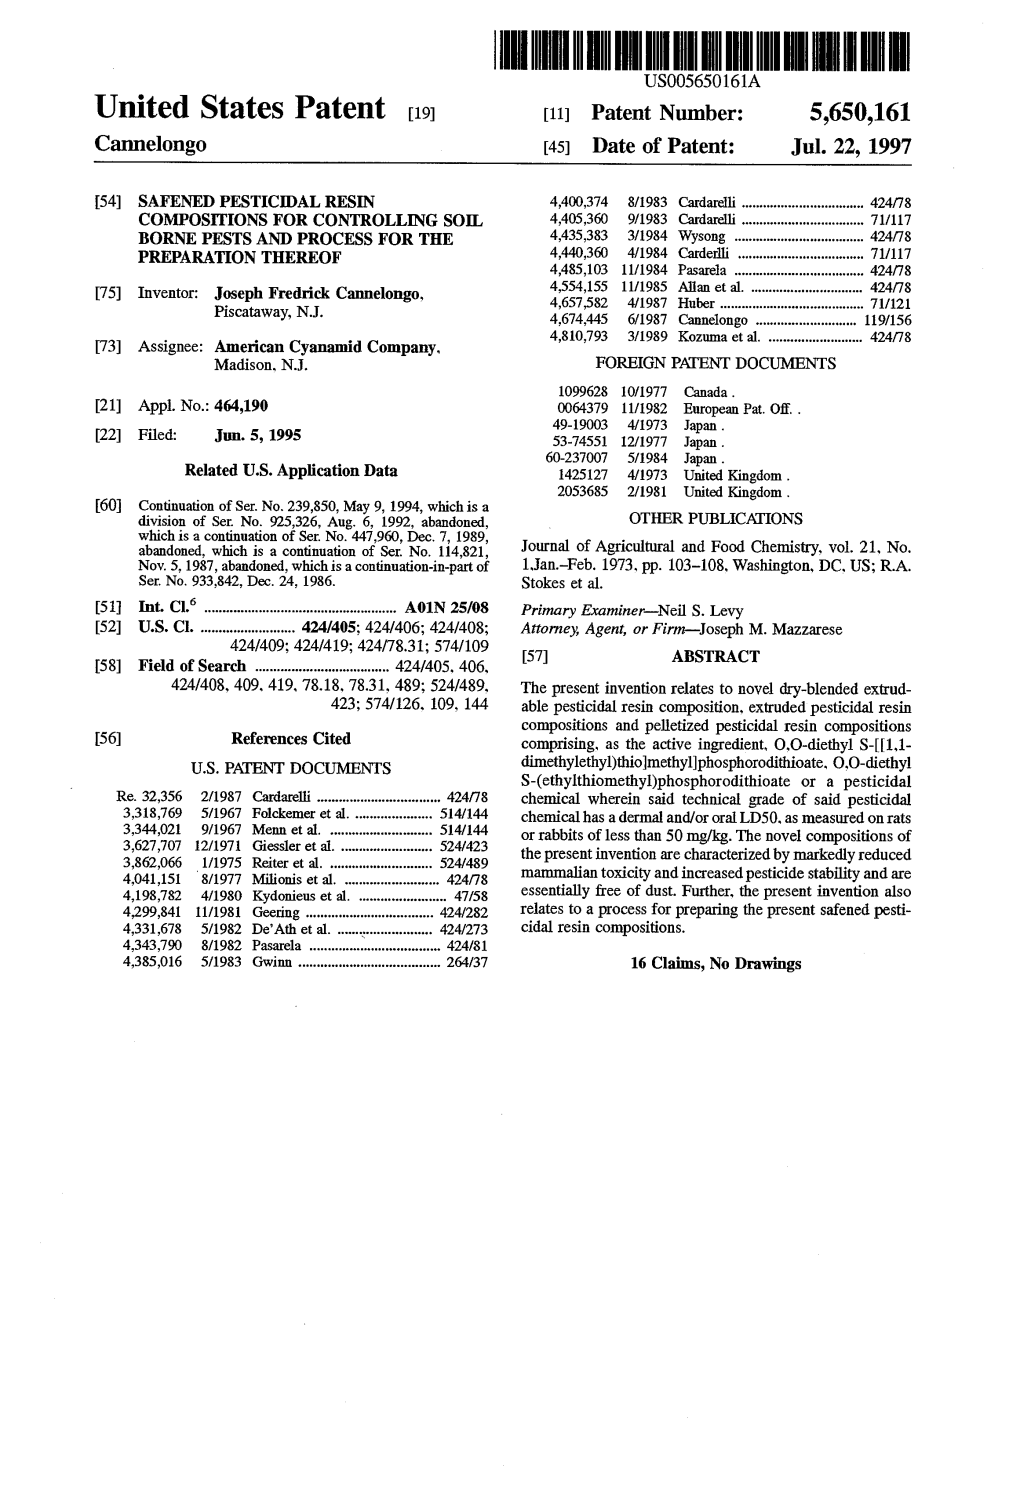 United States Patent 19 11 Patent Number: 5,650,161 Cannelongo 45) Date of Patent: Jul